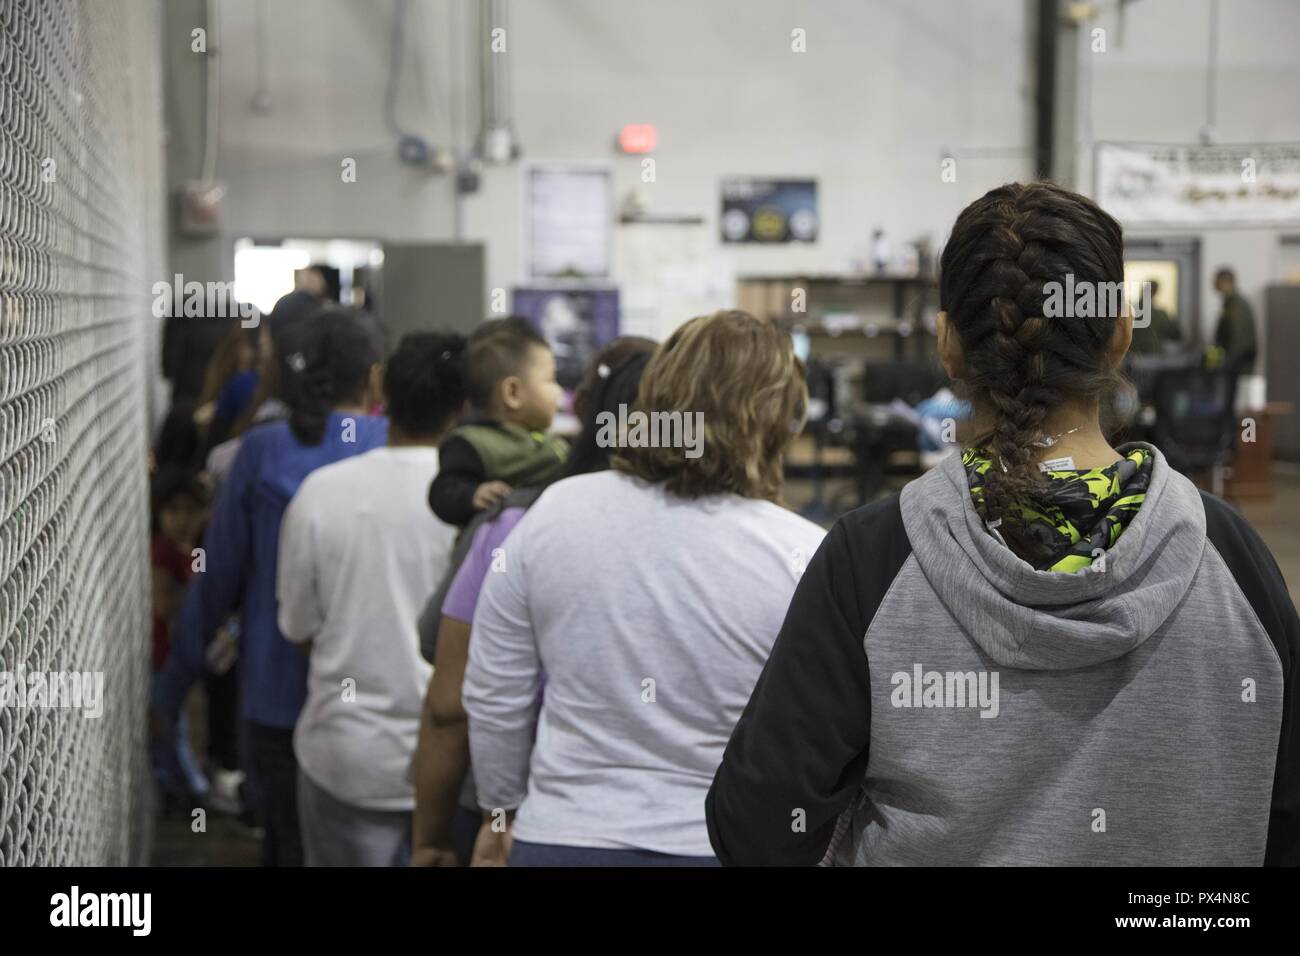 Alleged illegal border crossers waiting in line at the Central Processing Center in McAllen, Texas, June 17, 2018. Image courtesy United States Department of Defense. () Stock Photo